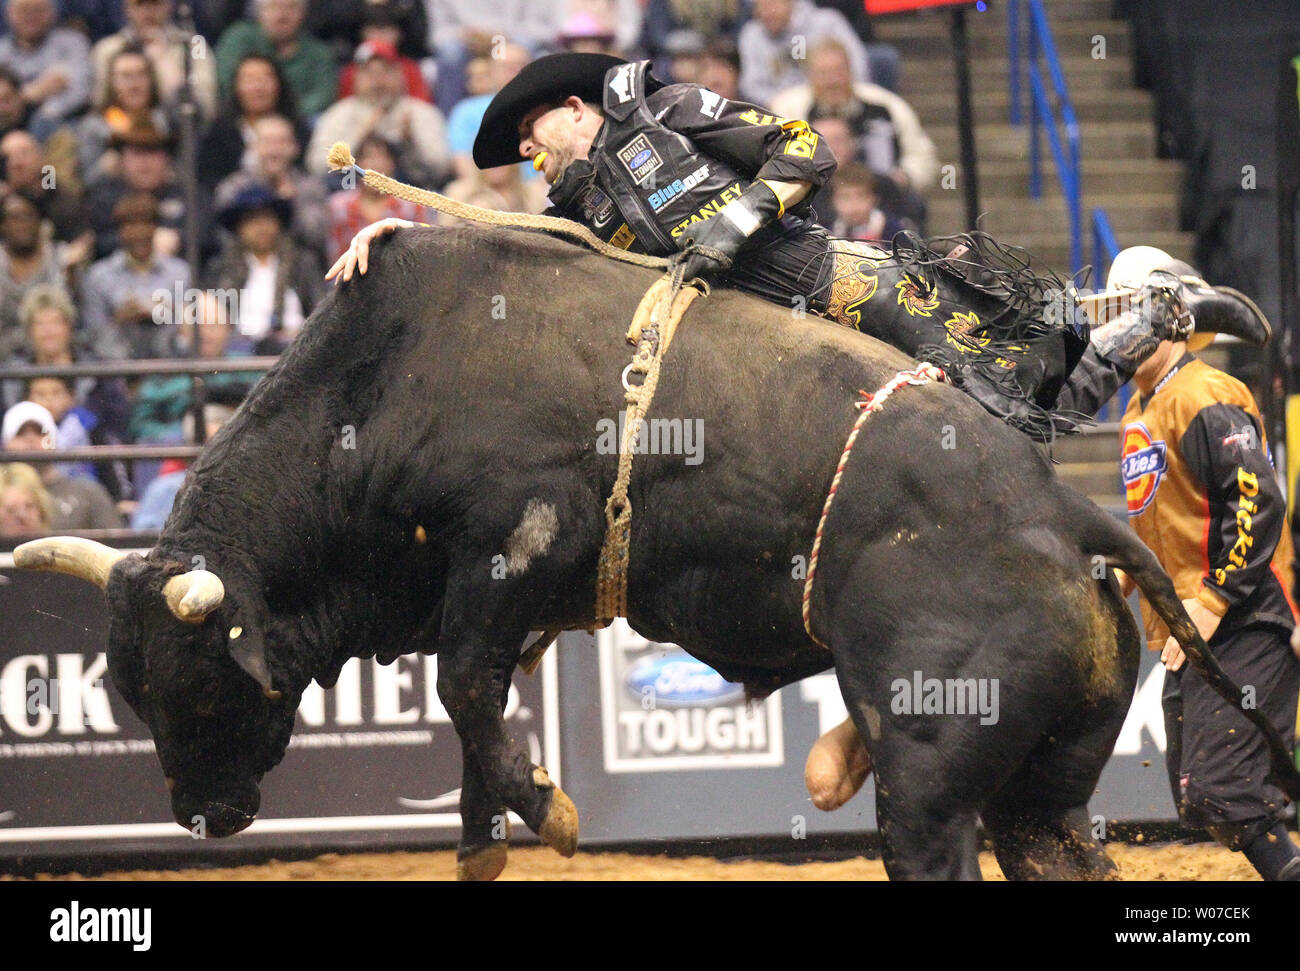 Douglass Duncan holds onto My Kinda Party the bull during the second round of the Professional Bull Riders at the Scottrade Center in St. Louis on February 15, 2014. UPI/Bill Greenblatt Stock Photo